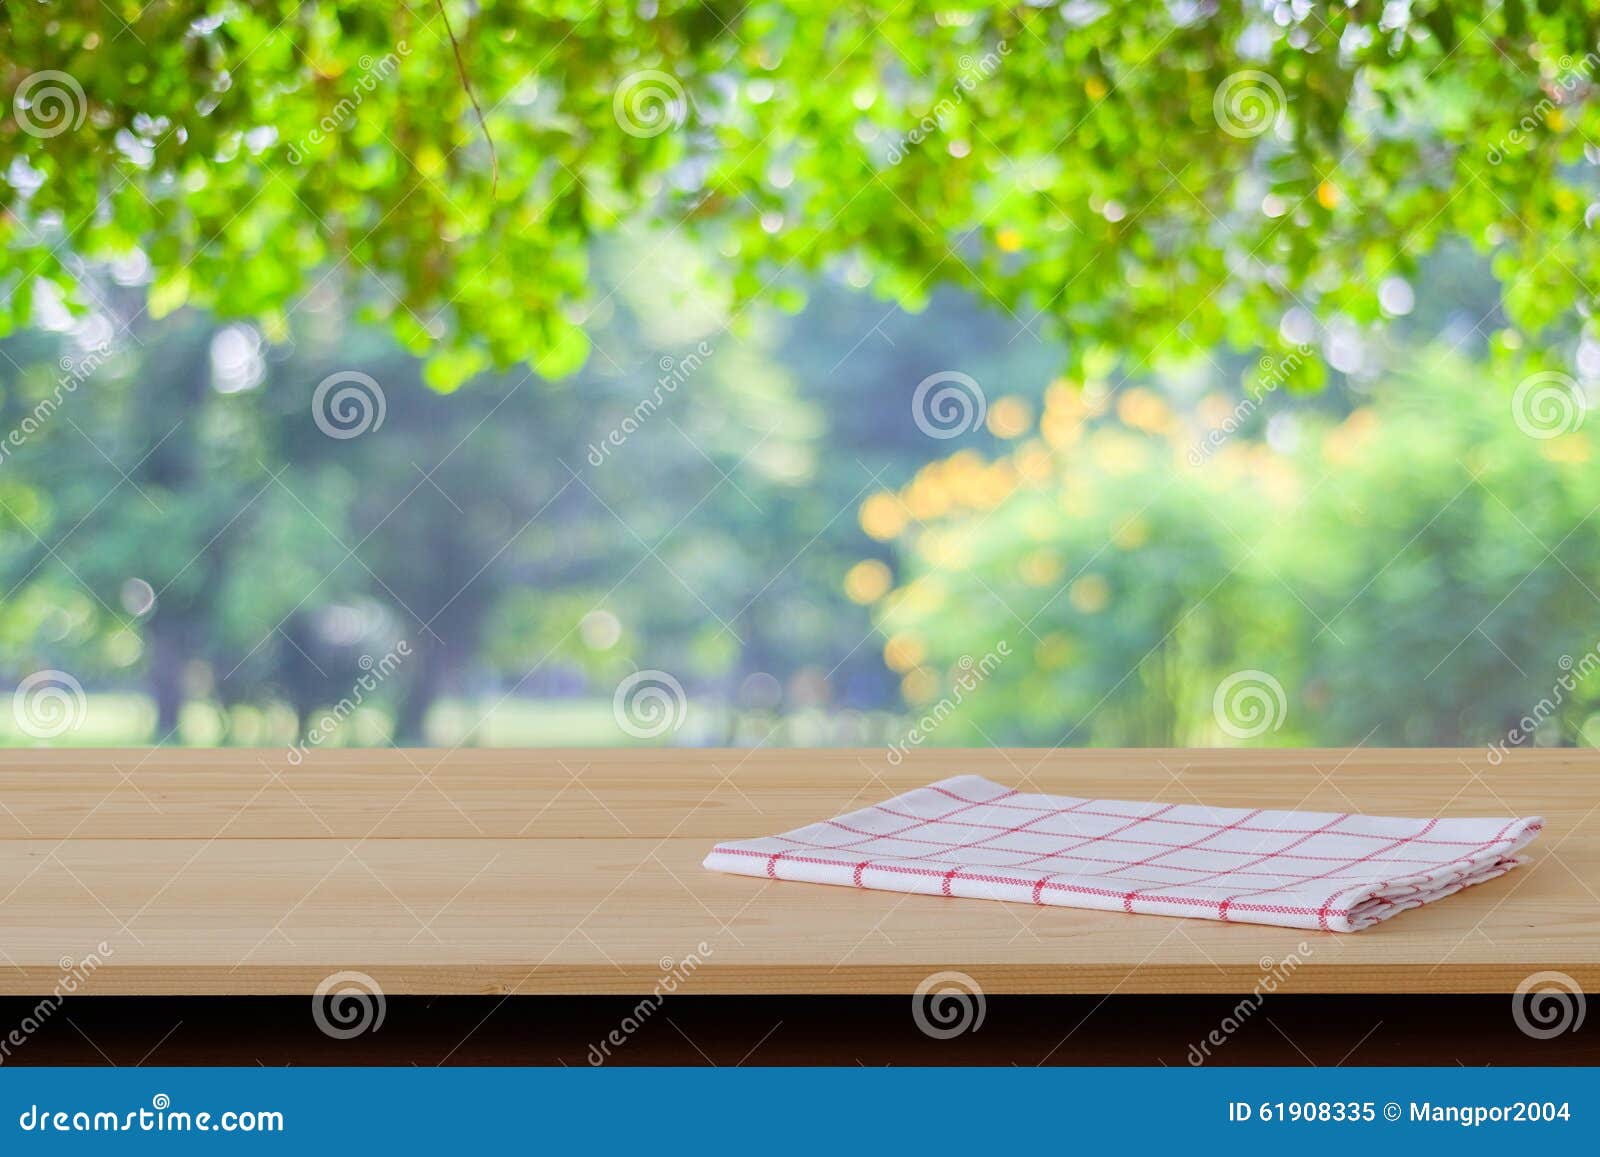 White And Red Tartan Cloth On Wood Table Over Blur Garden 